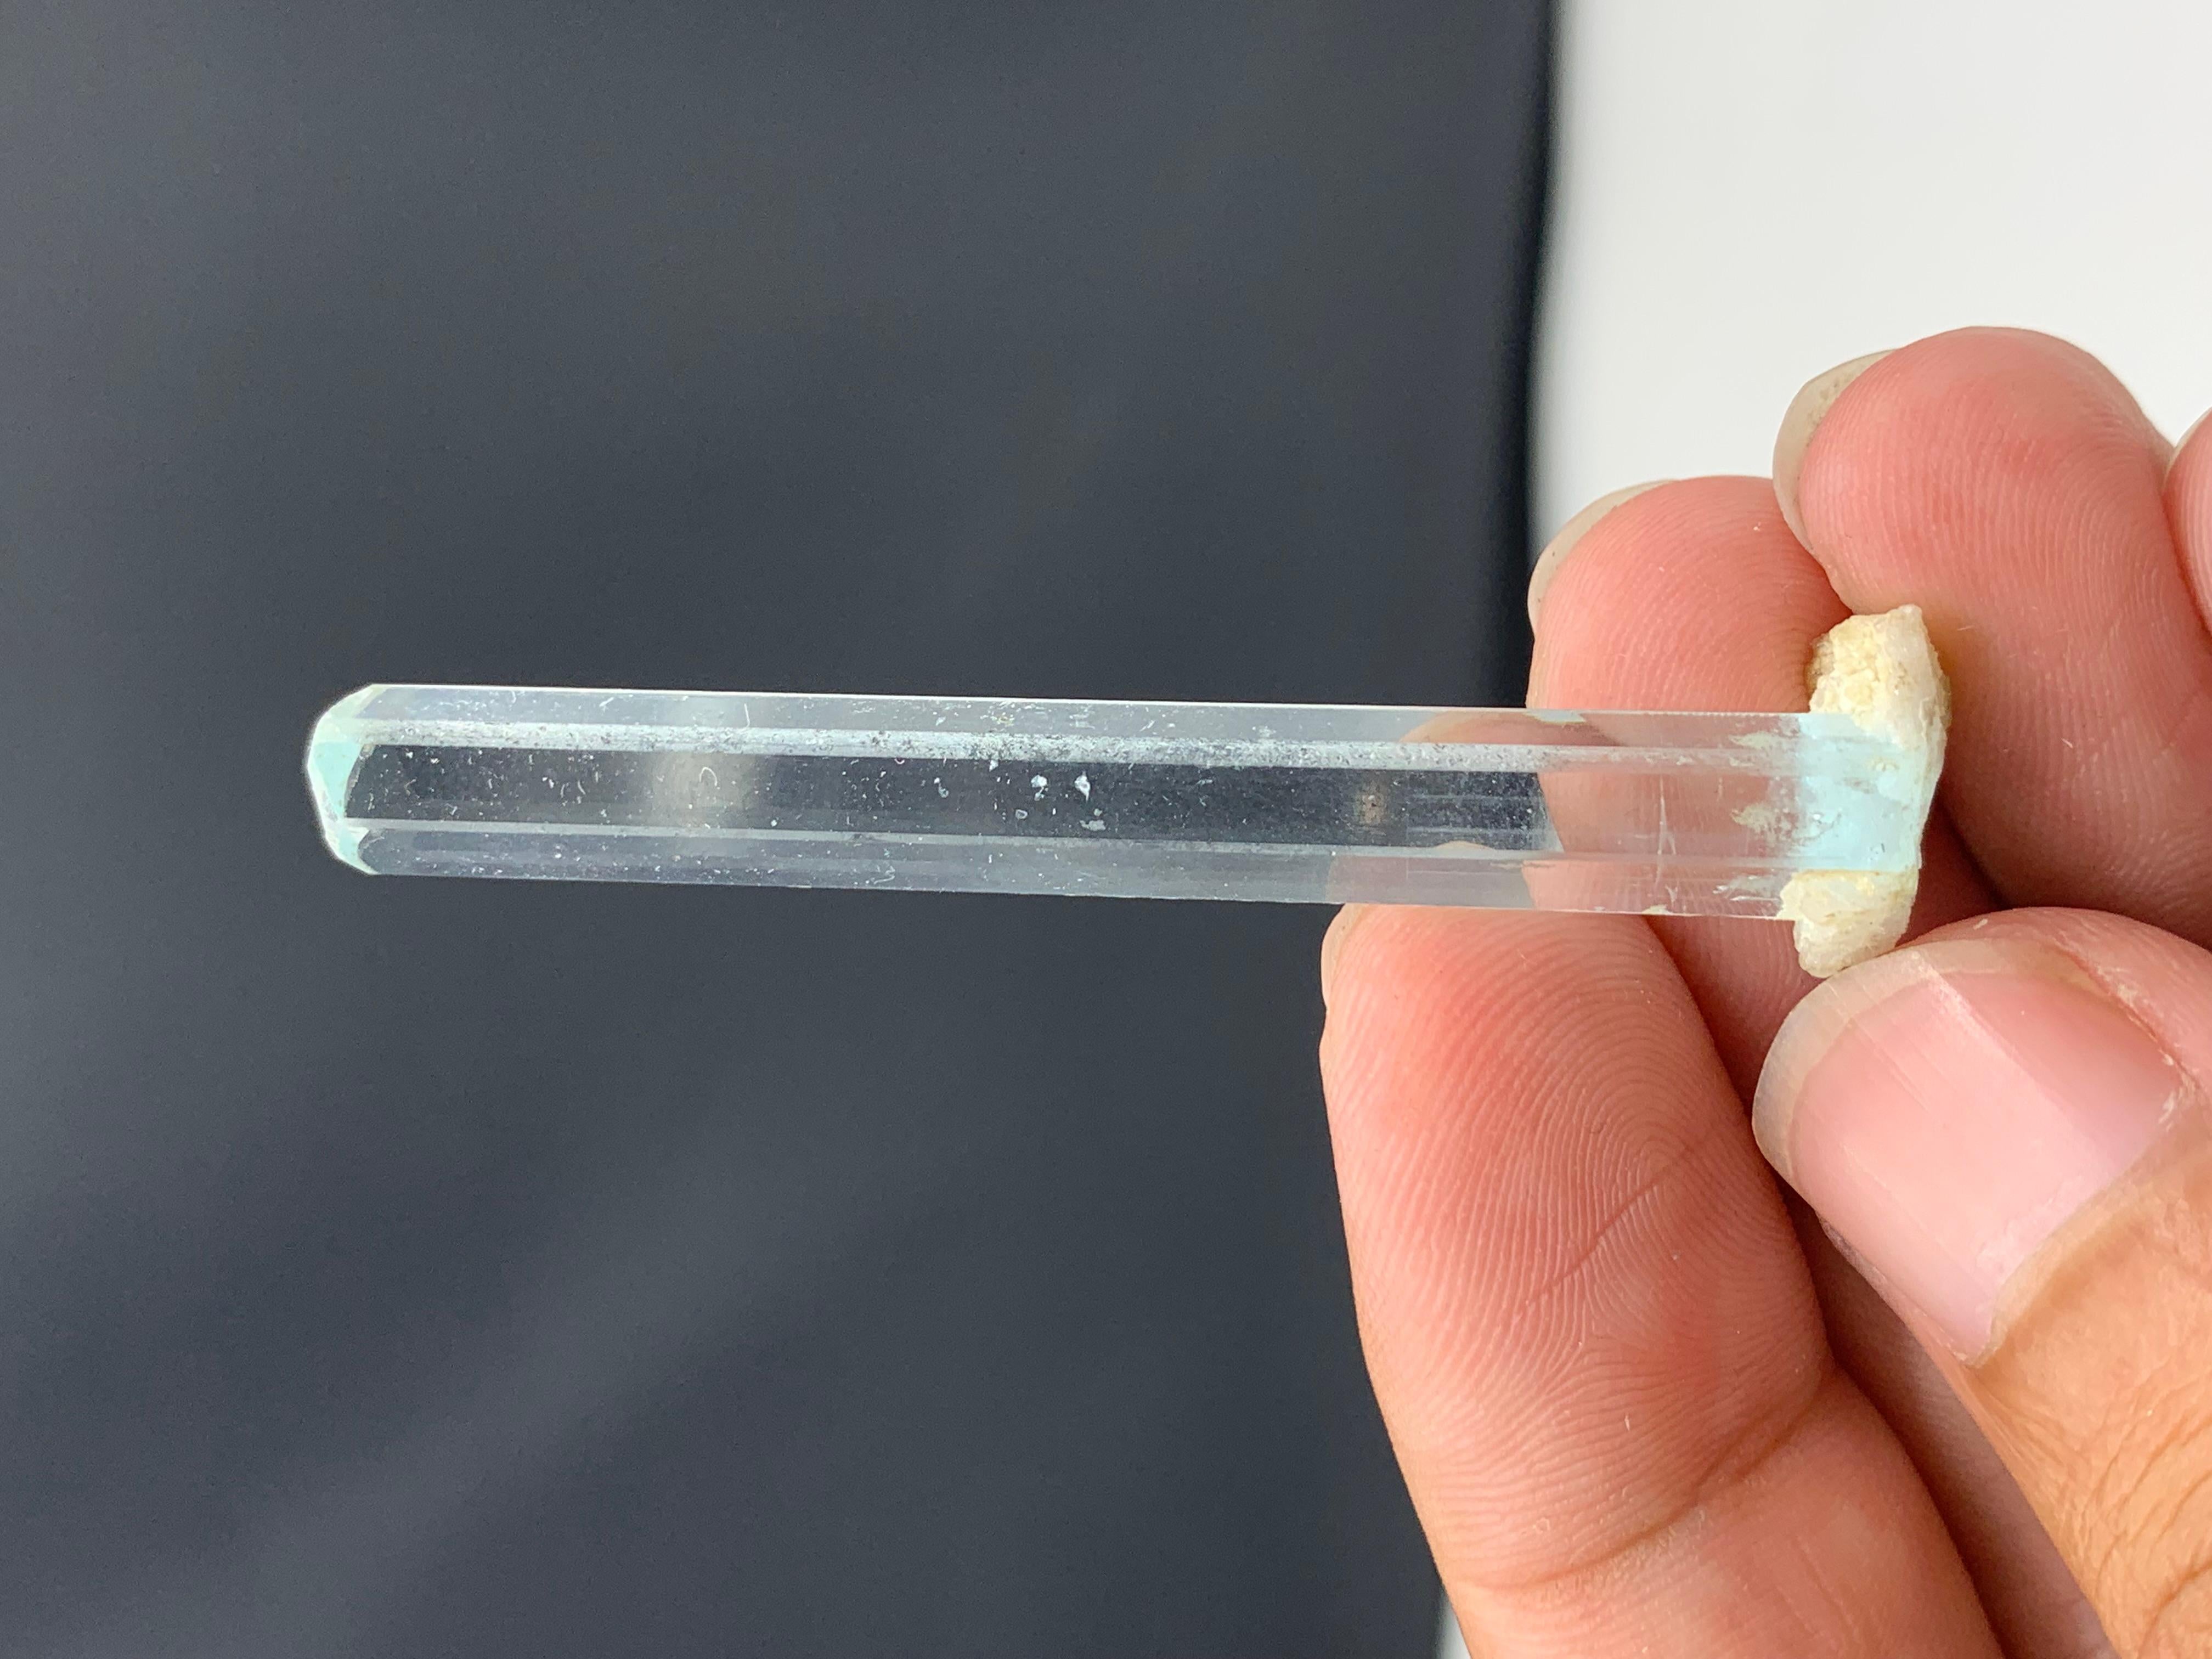 29.30 Carat Gorgeous Aquamarine Specimen From Skardu, Pakistan 
Weight: 29.30 Carat 
Dimension: 5.9 x 1.2 x 0.8 cm 
Origin: Skardu, Pakistan 

Aquamarine is a pale-blue to light-green variety of beryl. The color of aquamarine can be changed by heat.